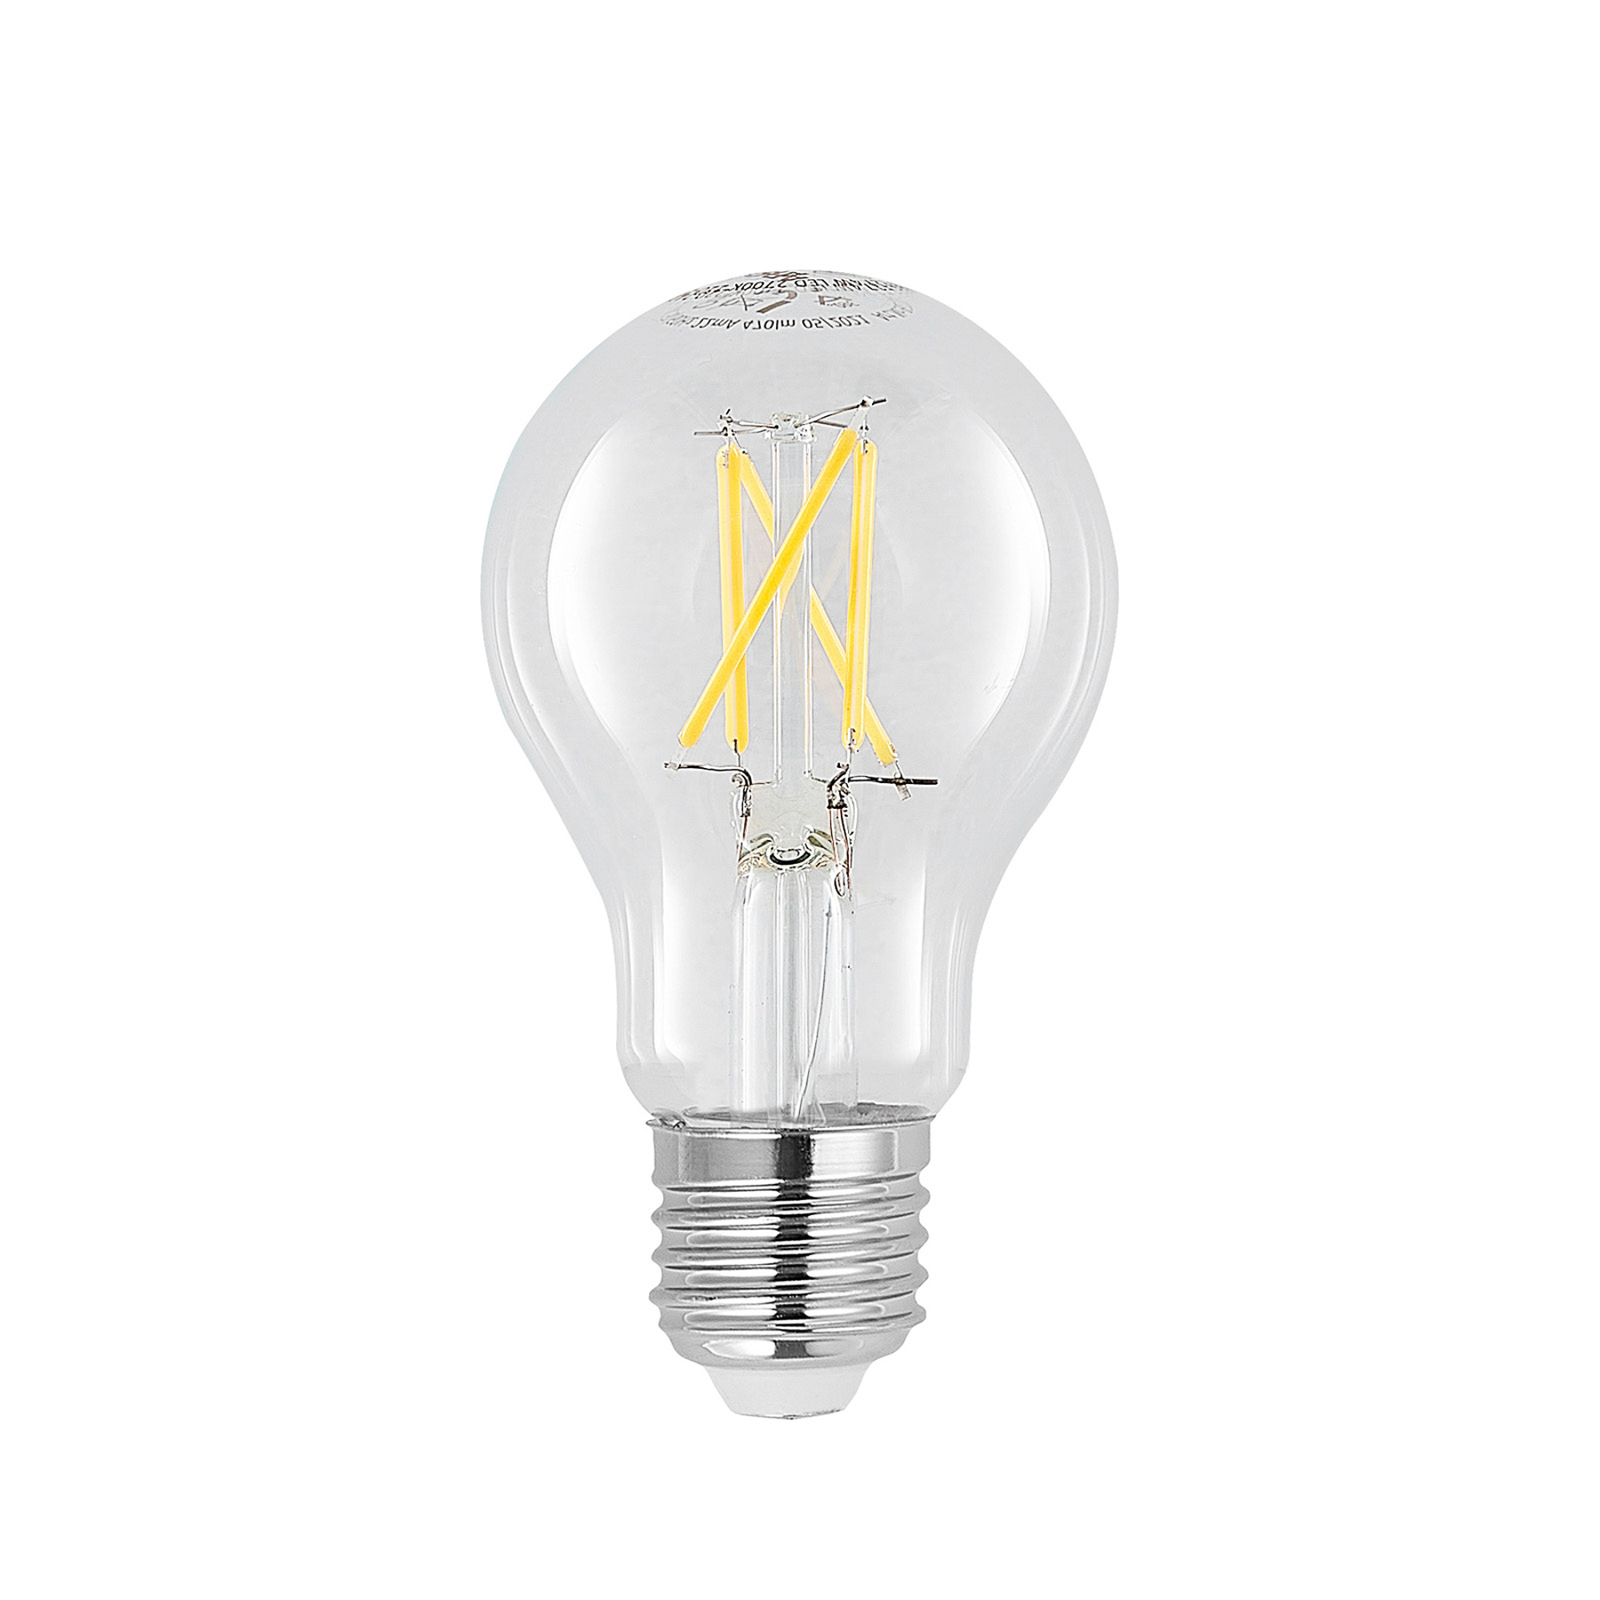 LED bulb E27 4W 2,700K filament dimmable clear 3x